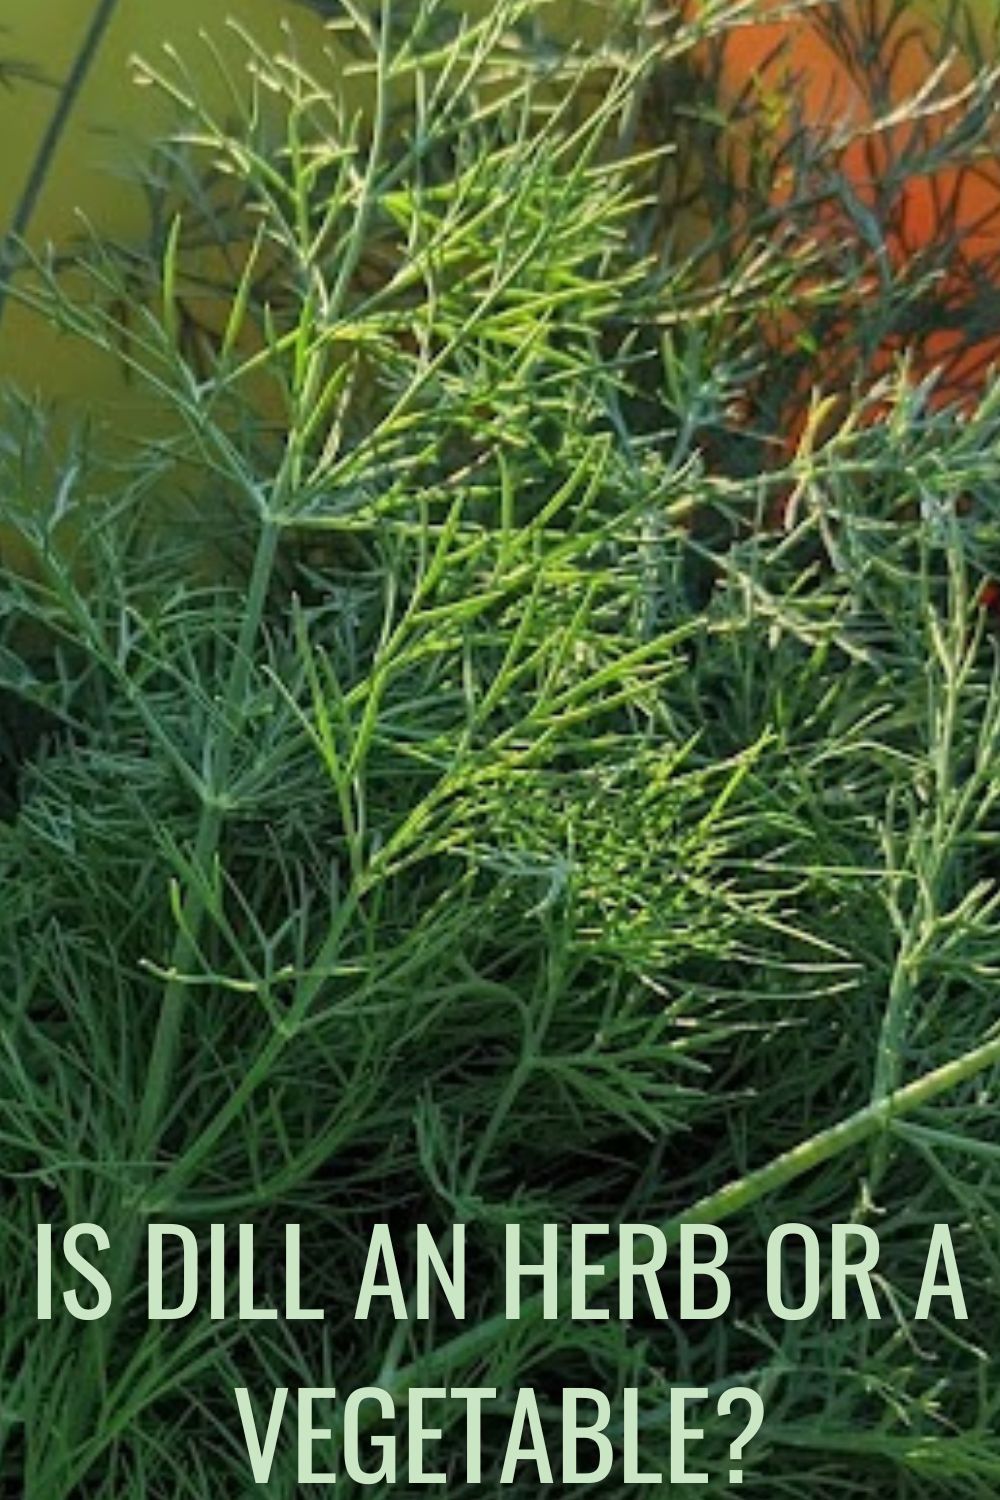 is dill an herb or a vegetable?